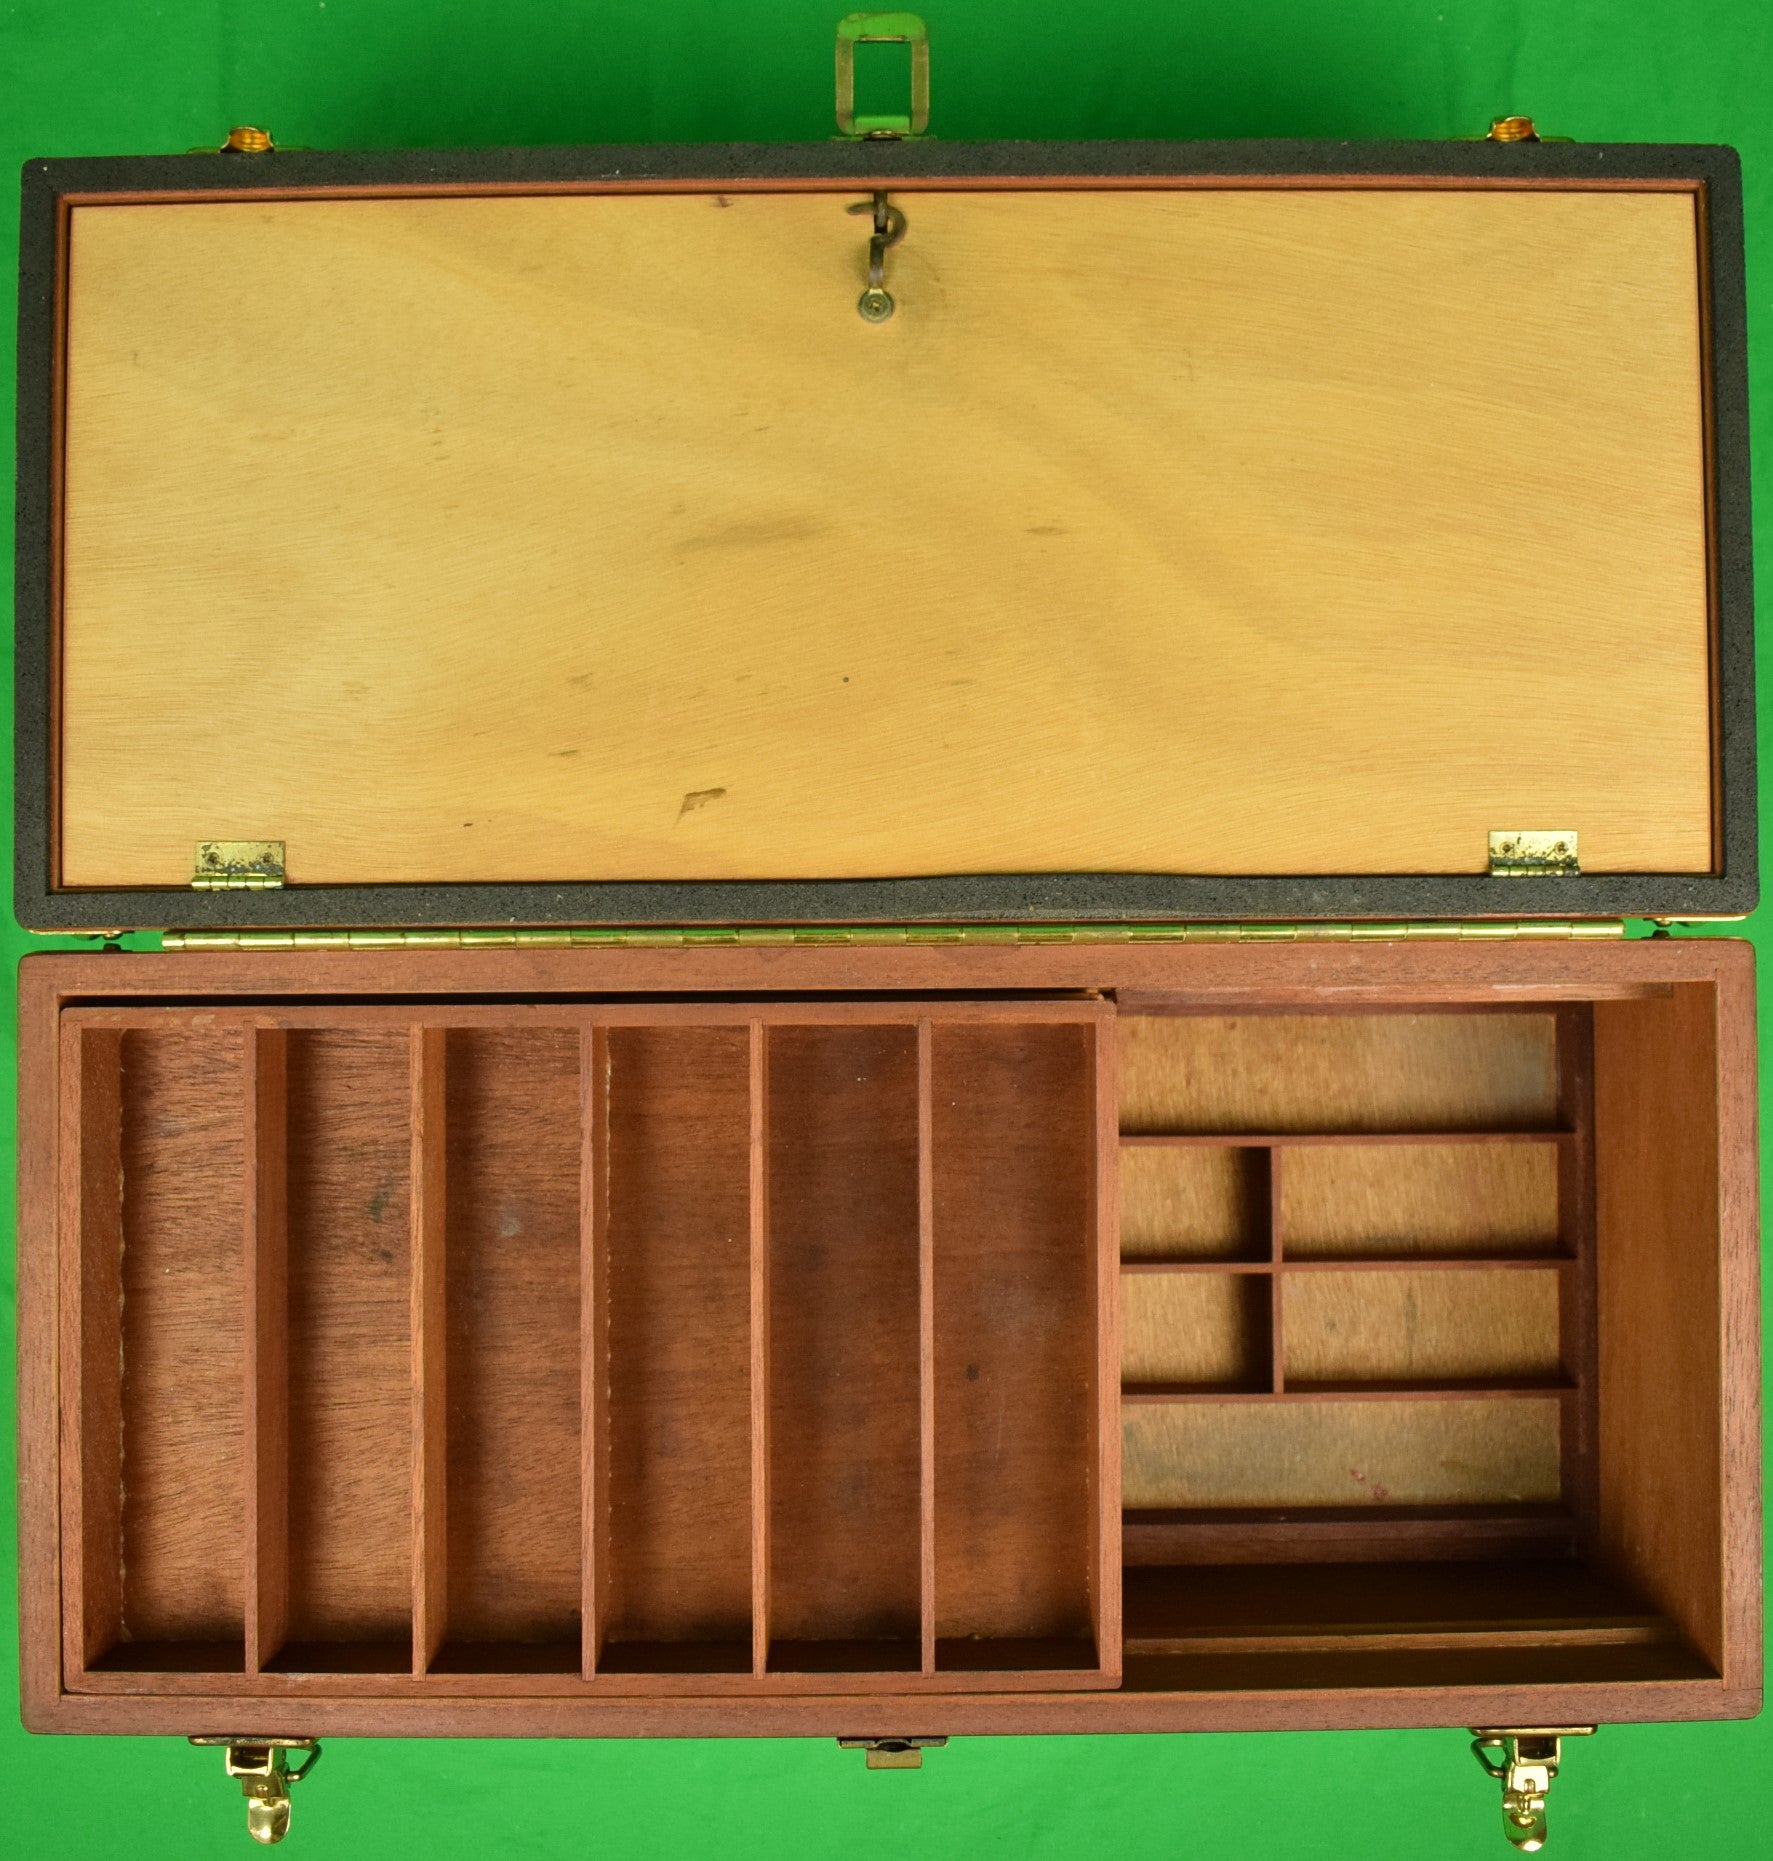 Abercrombie & Fitch De Luxe Mahogany Tackle Box w/ Royal Stewart Tart